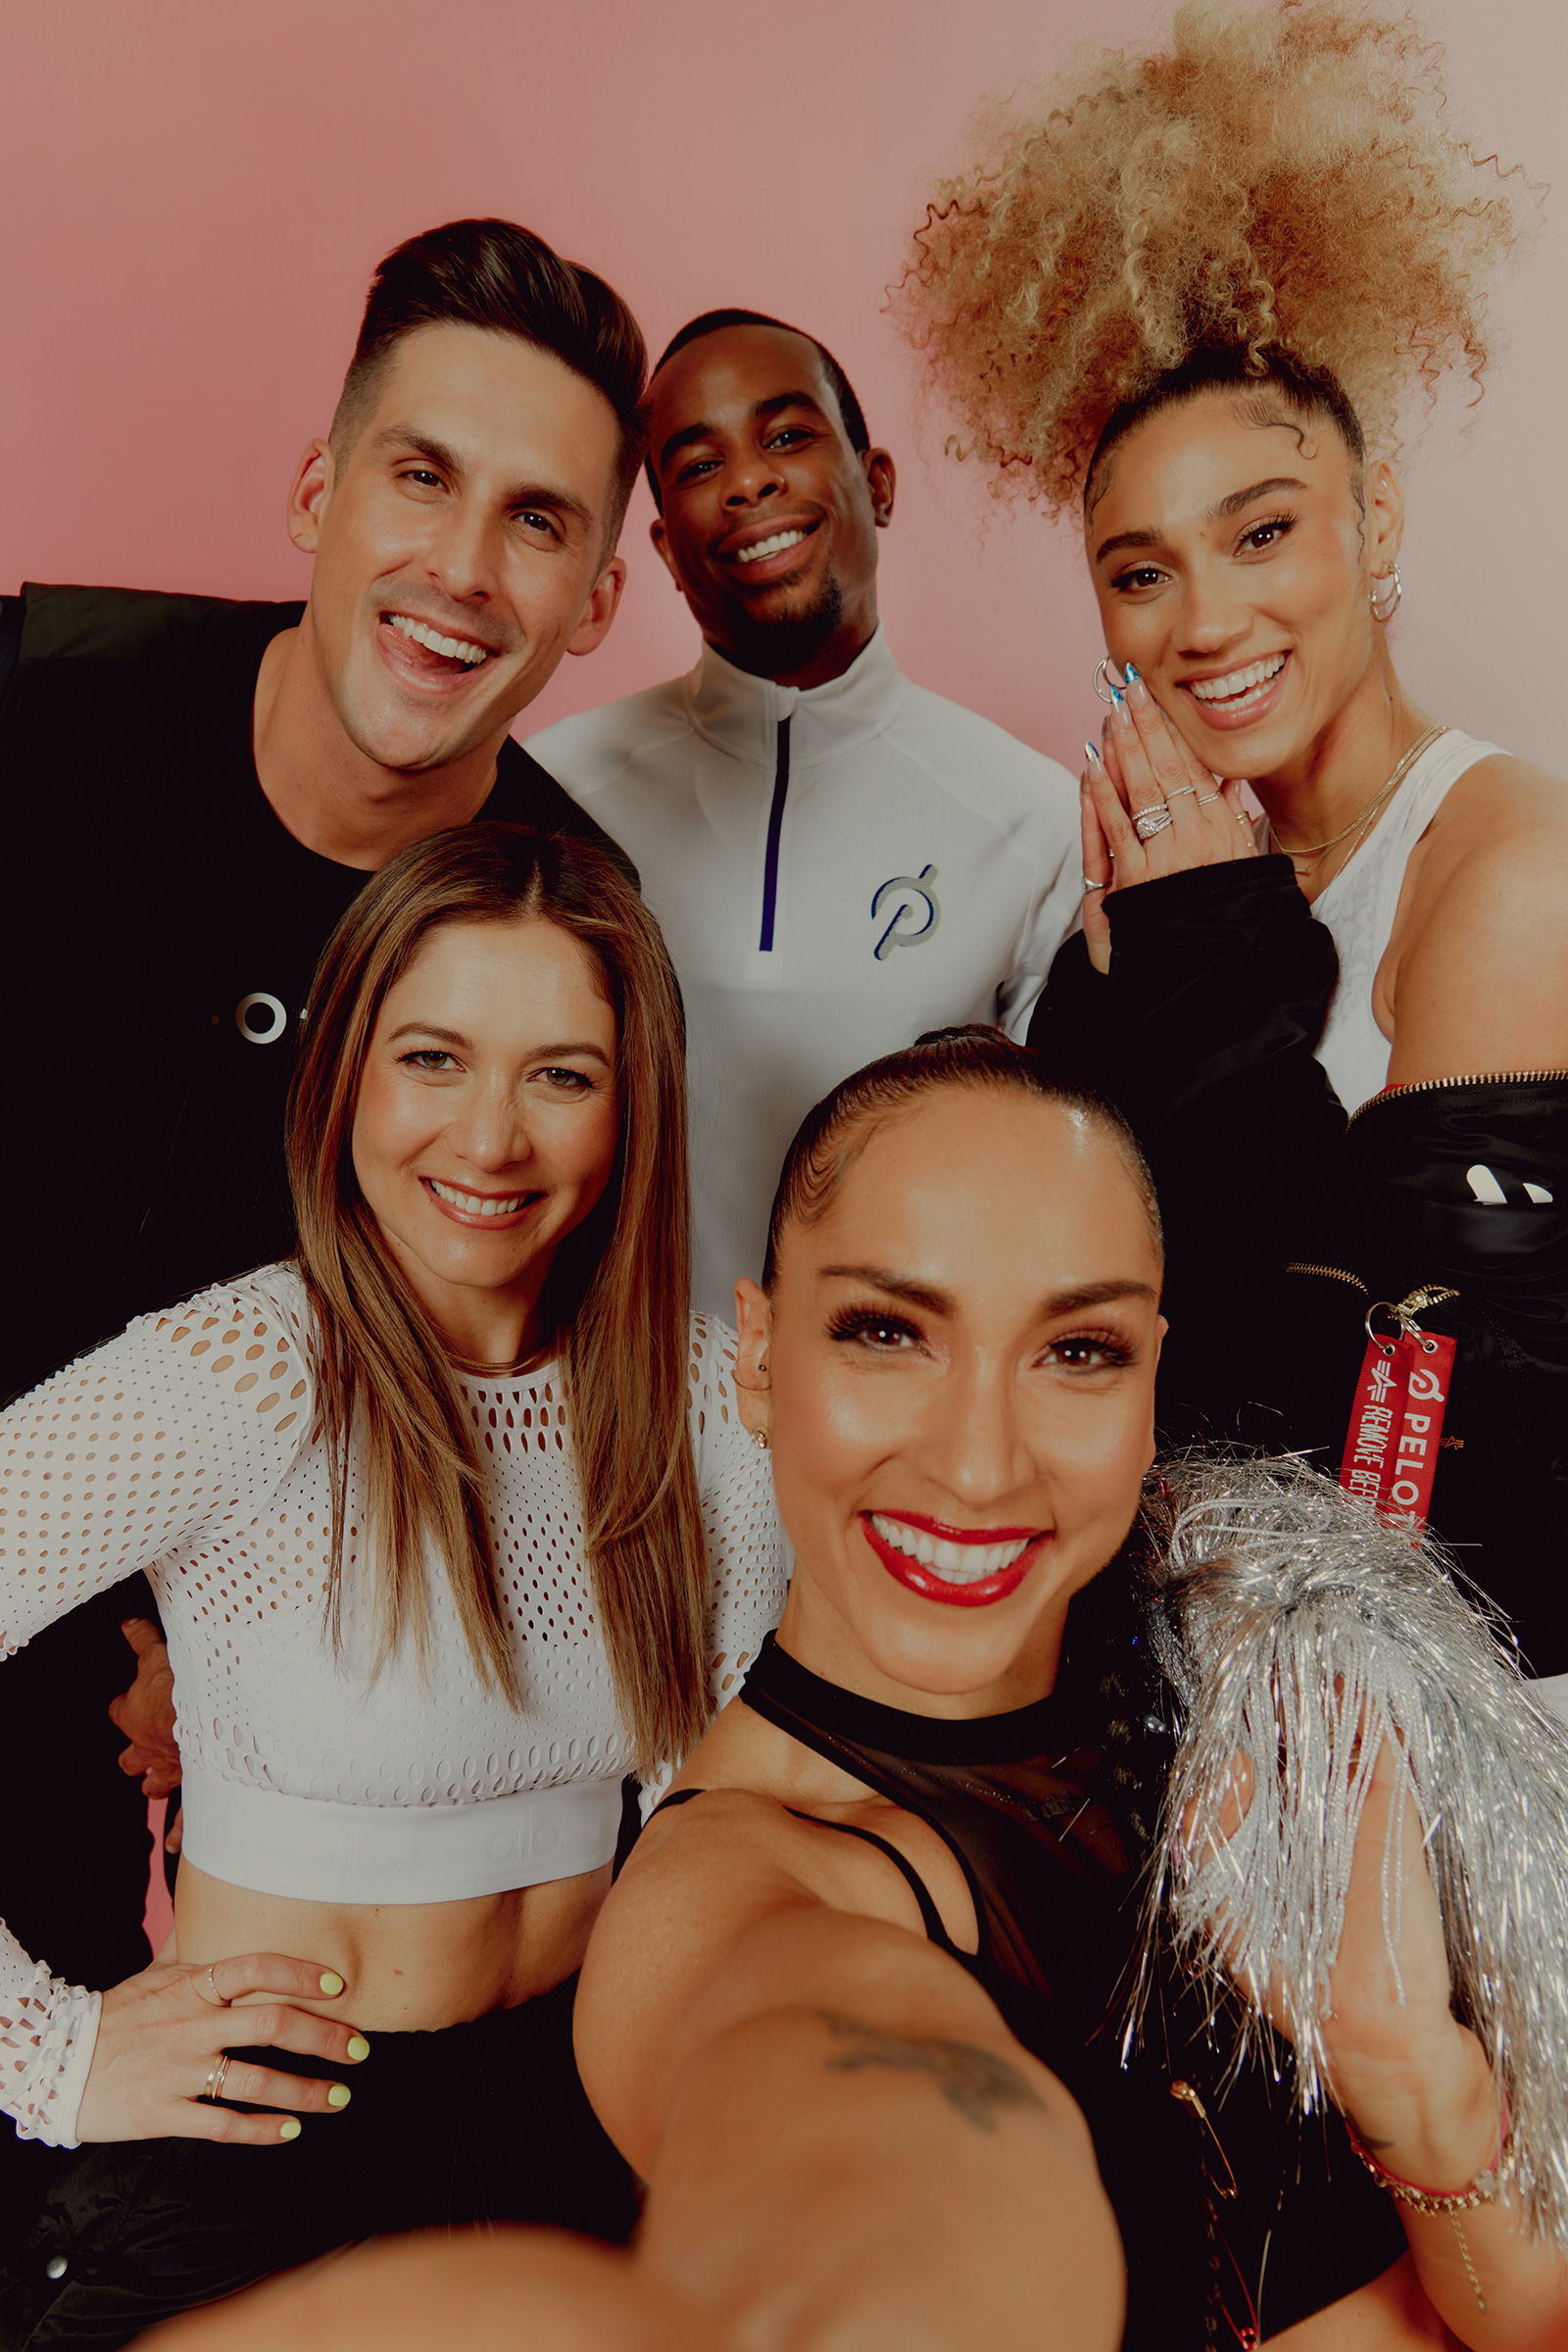 Clockwise from top left: Peloton instructors Cody Rigsby, Alex Toussaint, Ally Love, Robin Arzón, and Emma Lovewell in May in New York City (Victor Llorente for TIME)